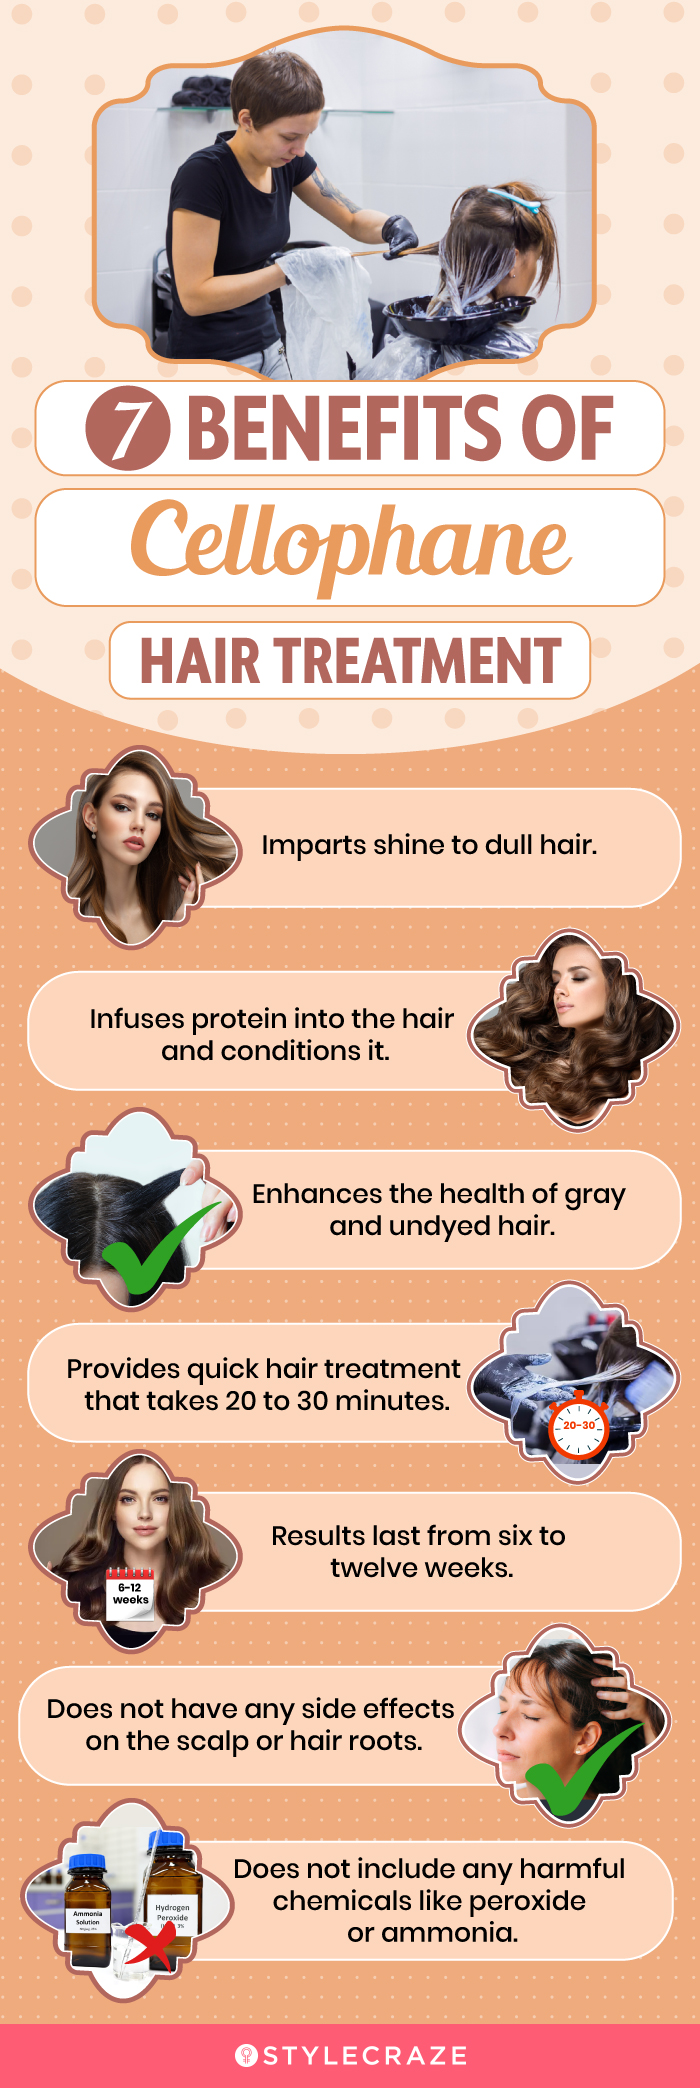 7 benefits of cellophane hair treatment (infographic)